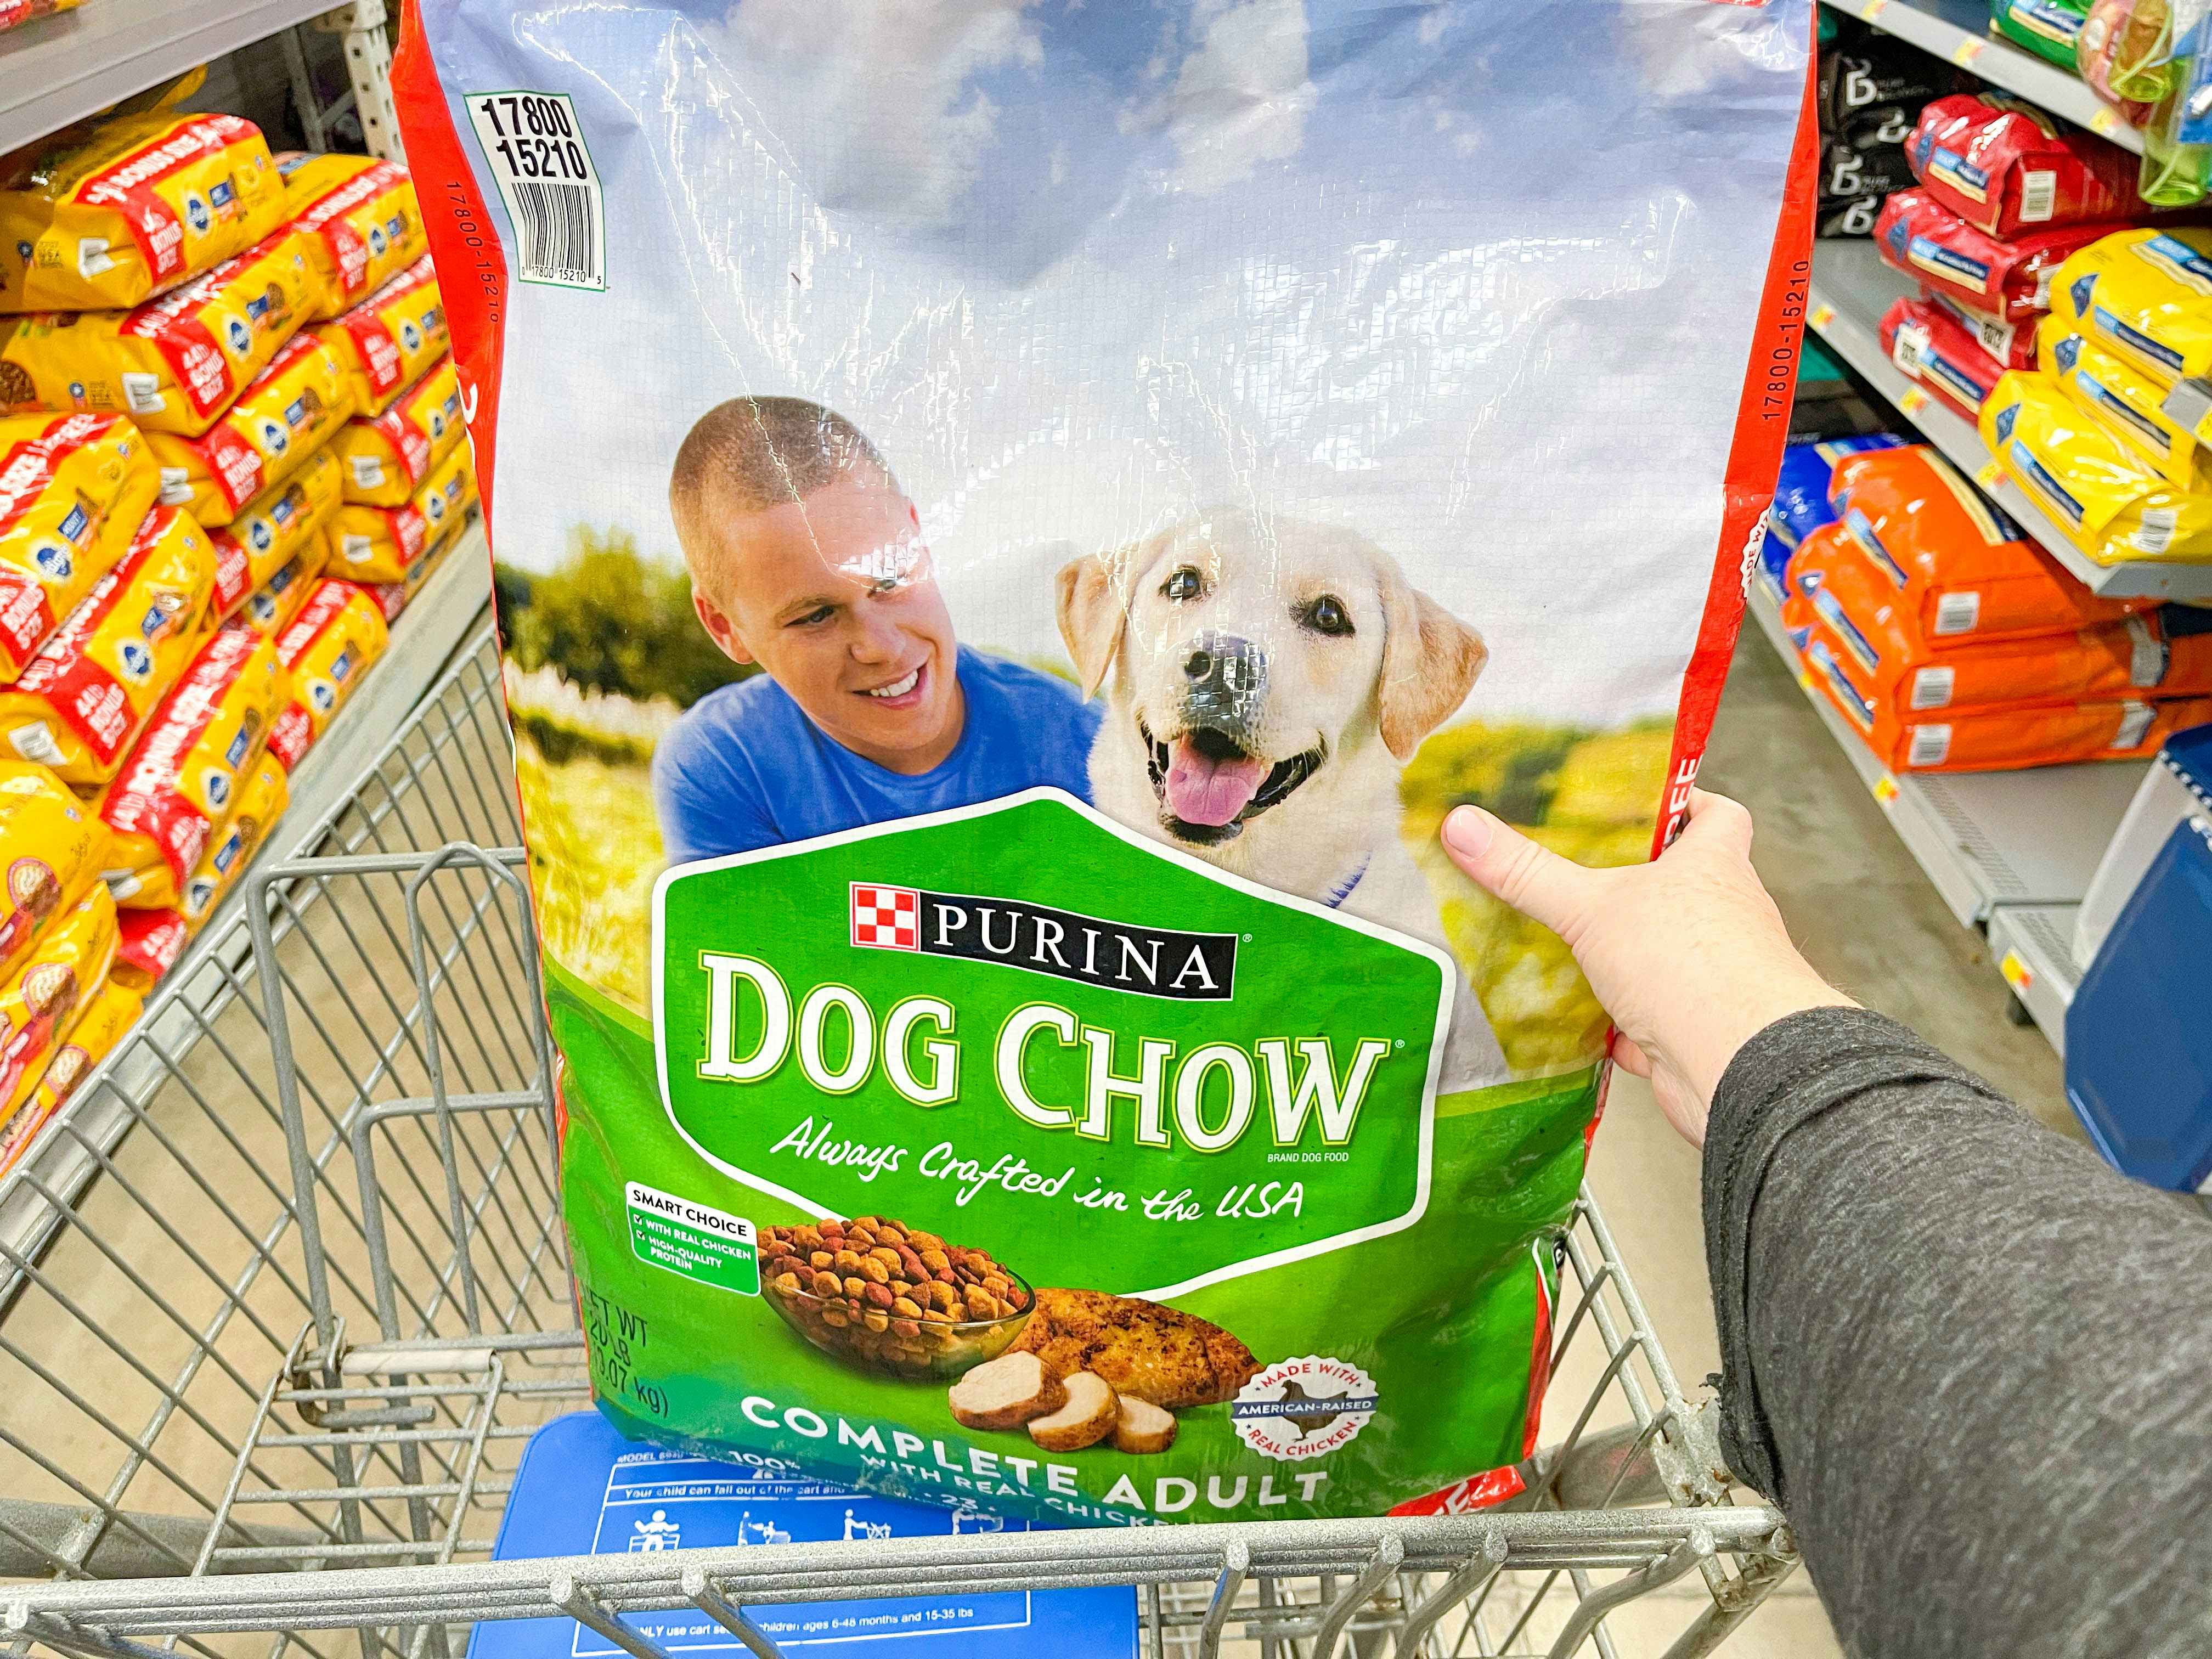 a walmart cart with a large bag of dog food in the top basket being held by a person 